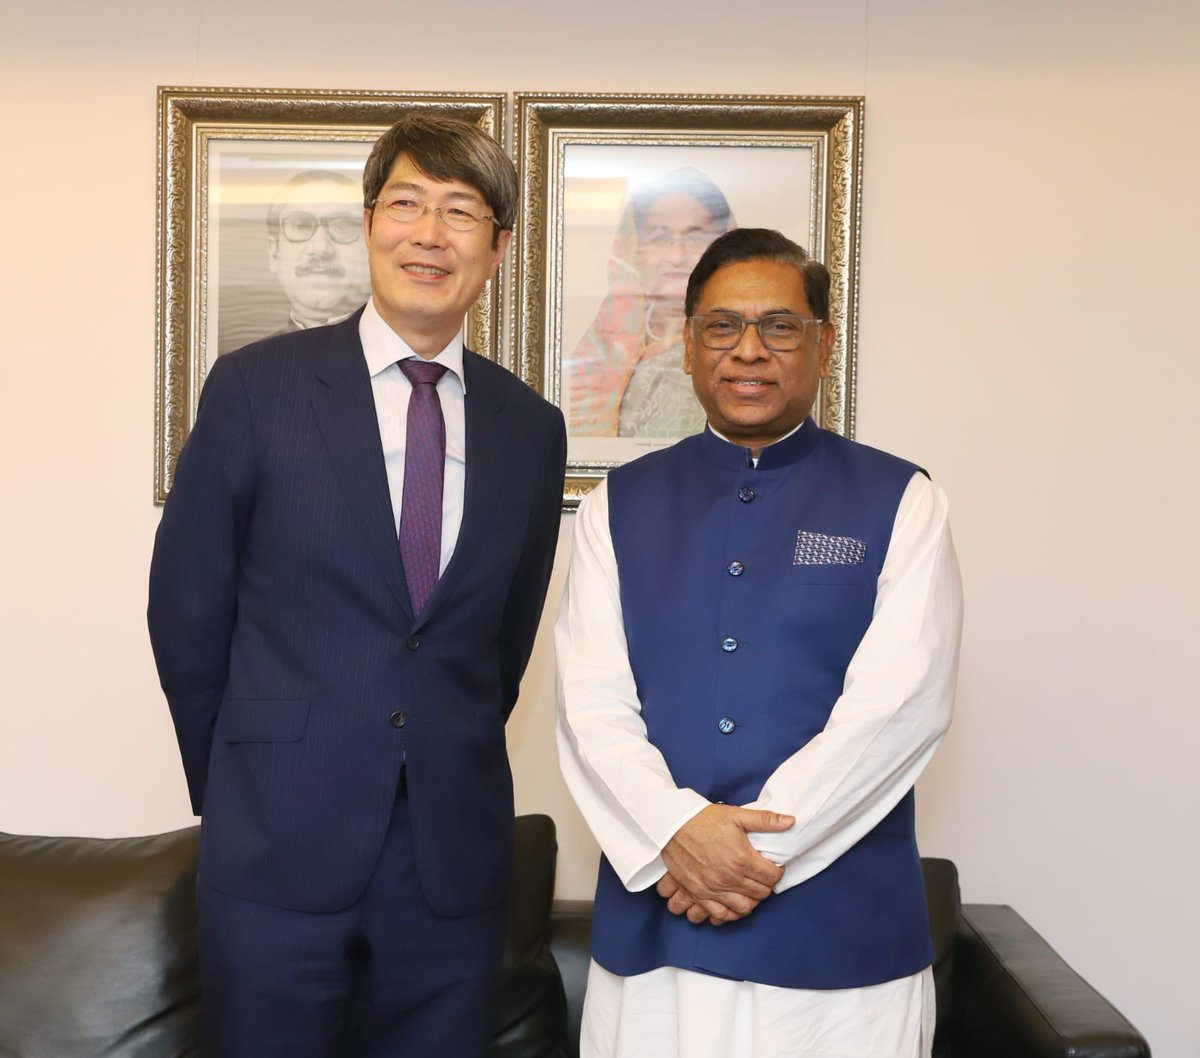 Had a productive meeting today with Japanese Ambassador Iwama Kiminori at the Secretariat. Discussed mutual interests such as power projects and Japanese investments in Bangladesh. Warmly welcomed Ambassador Iwama, emphasizing the strong bond between our nations. Also present was